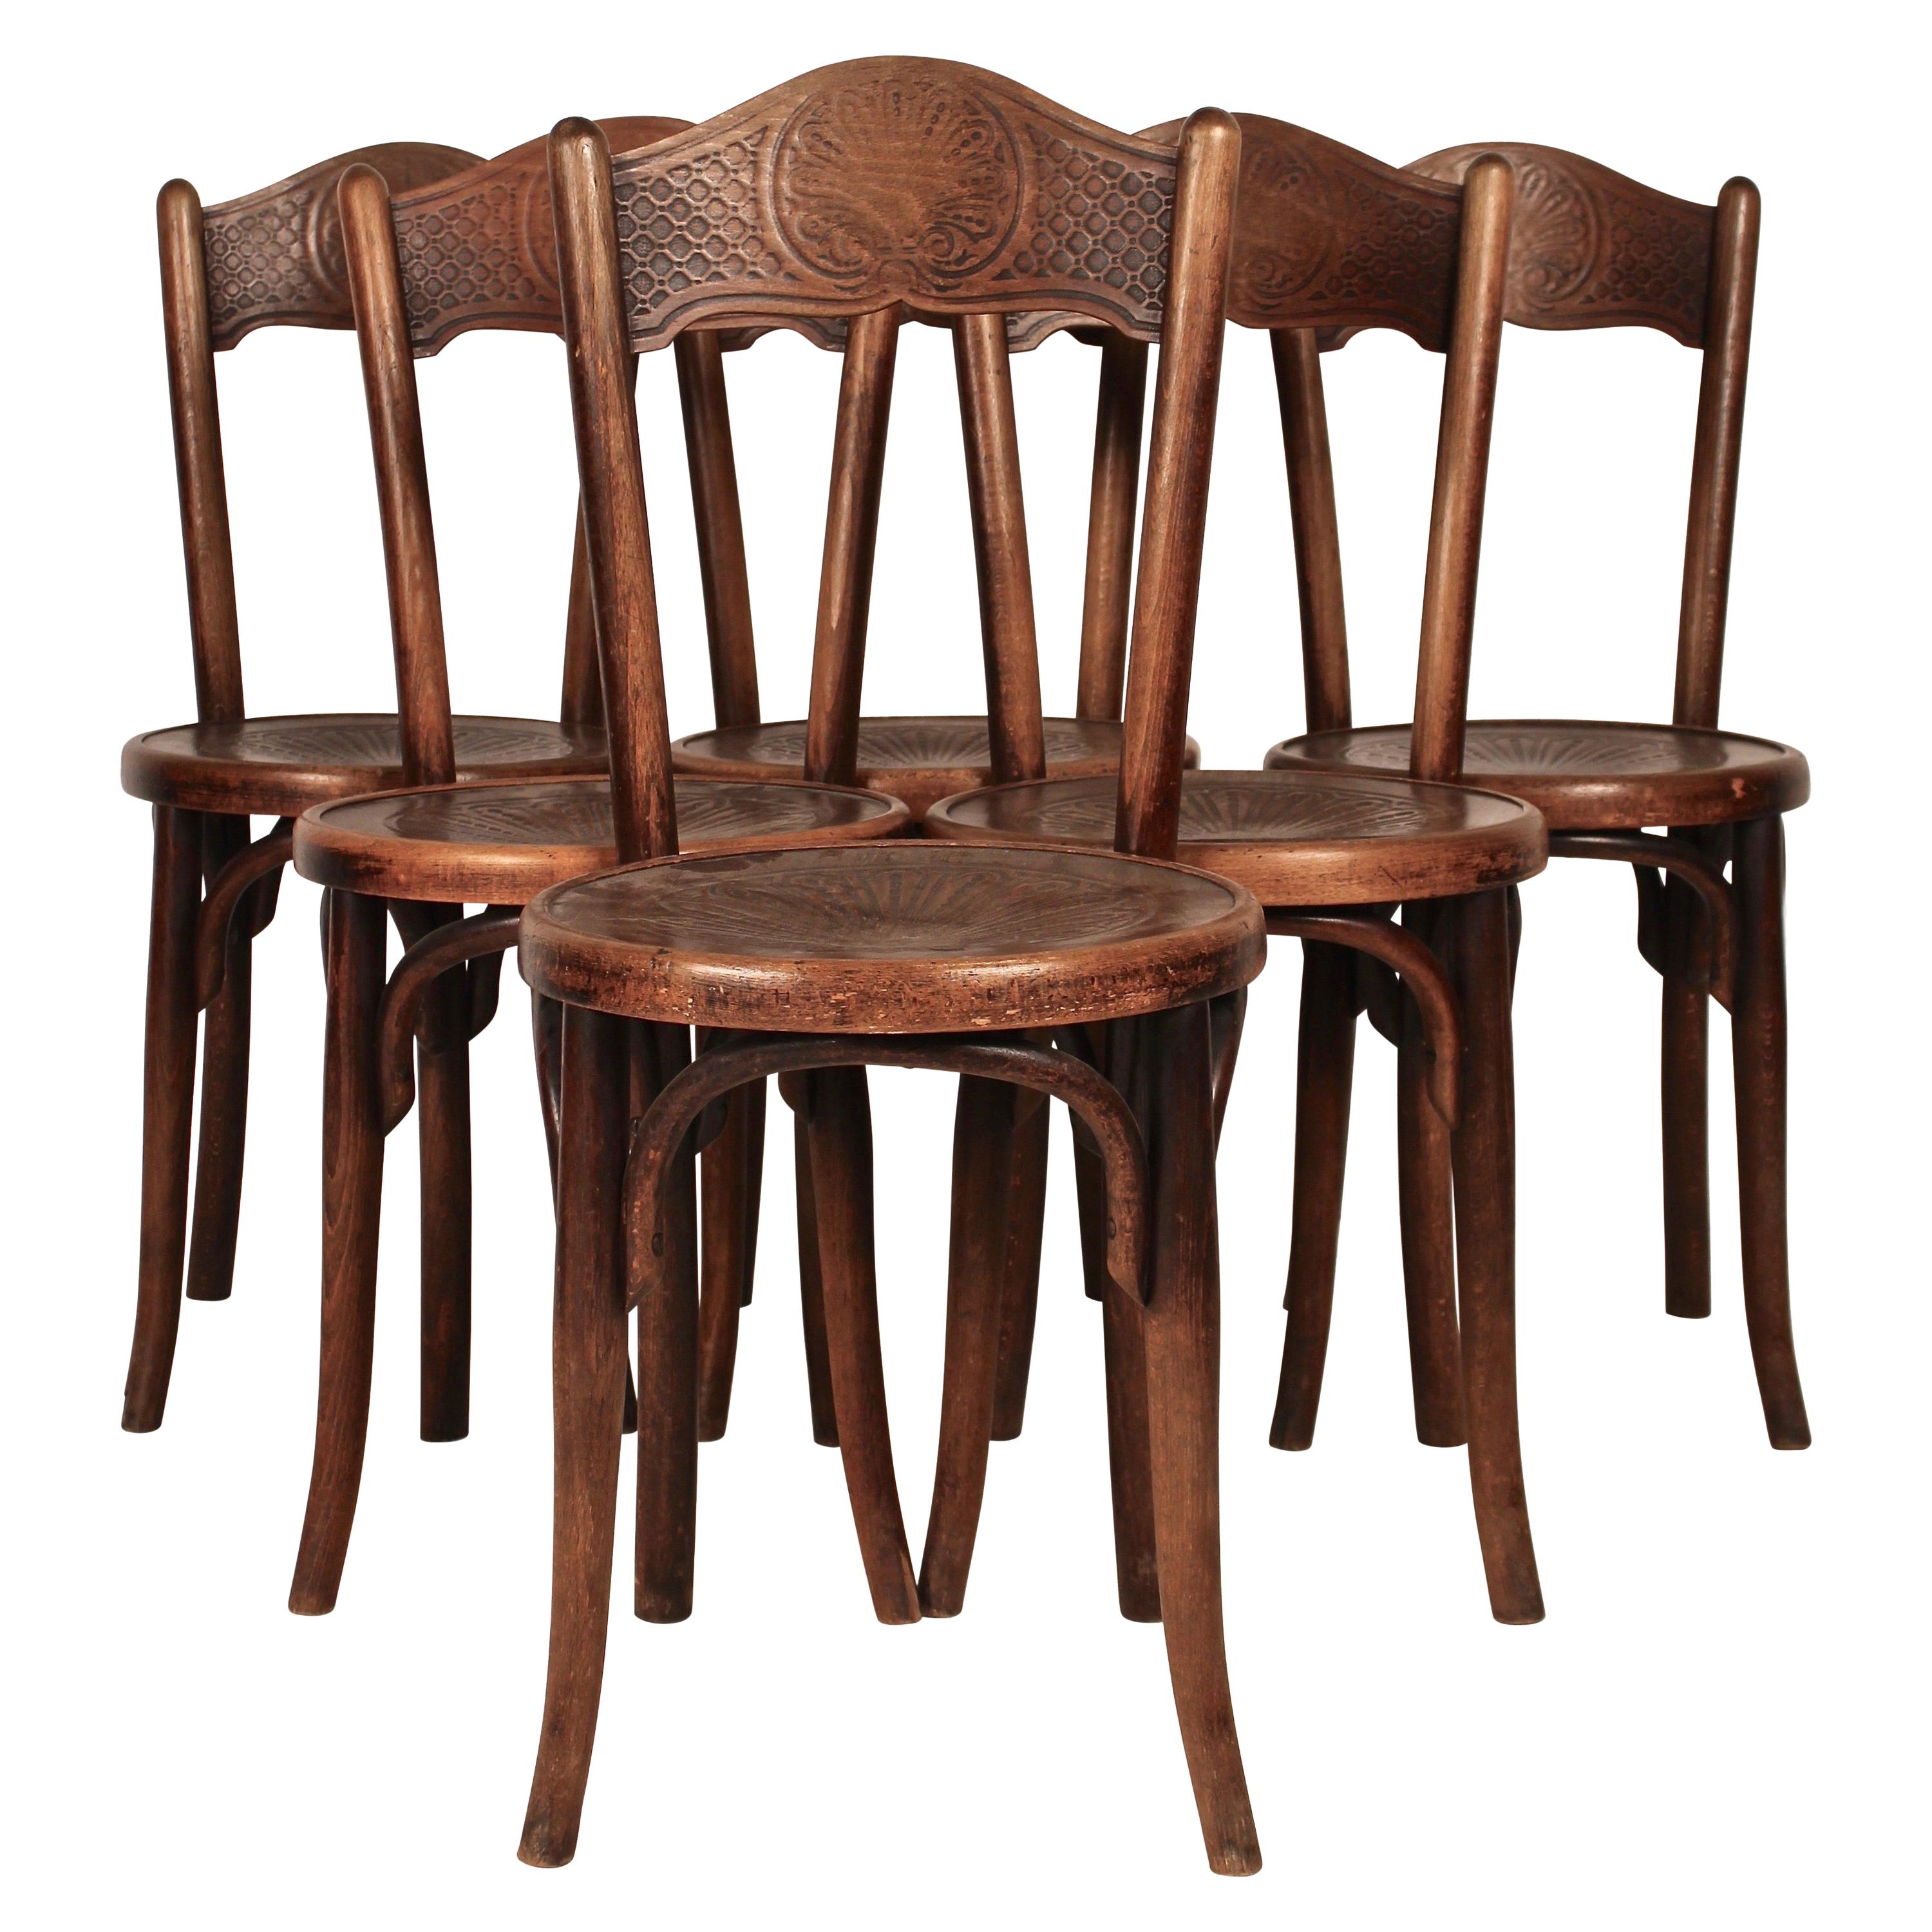 Set of 6 Bistro Chairs by Jacob & Josef Kohn, 1890 Austro-Hungarian Empire For Sale